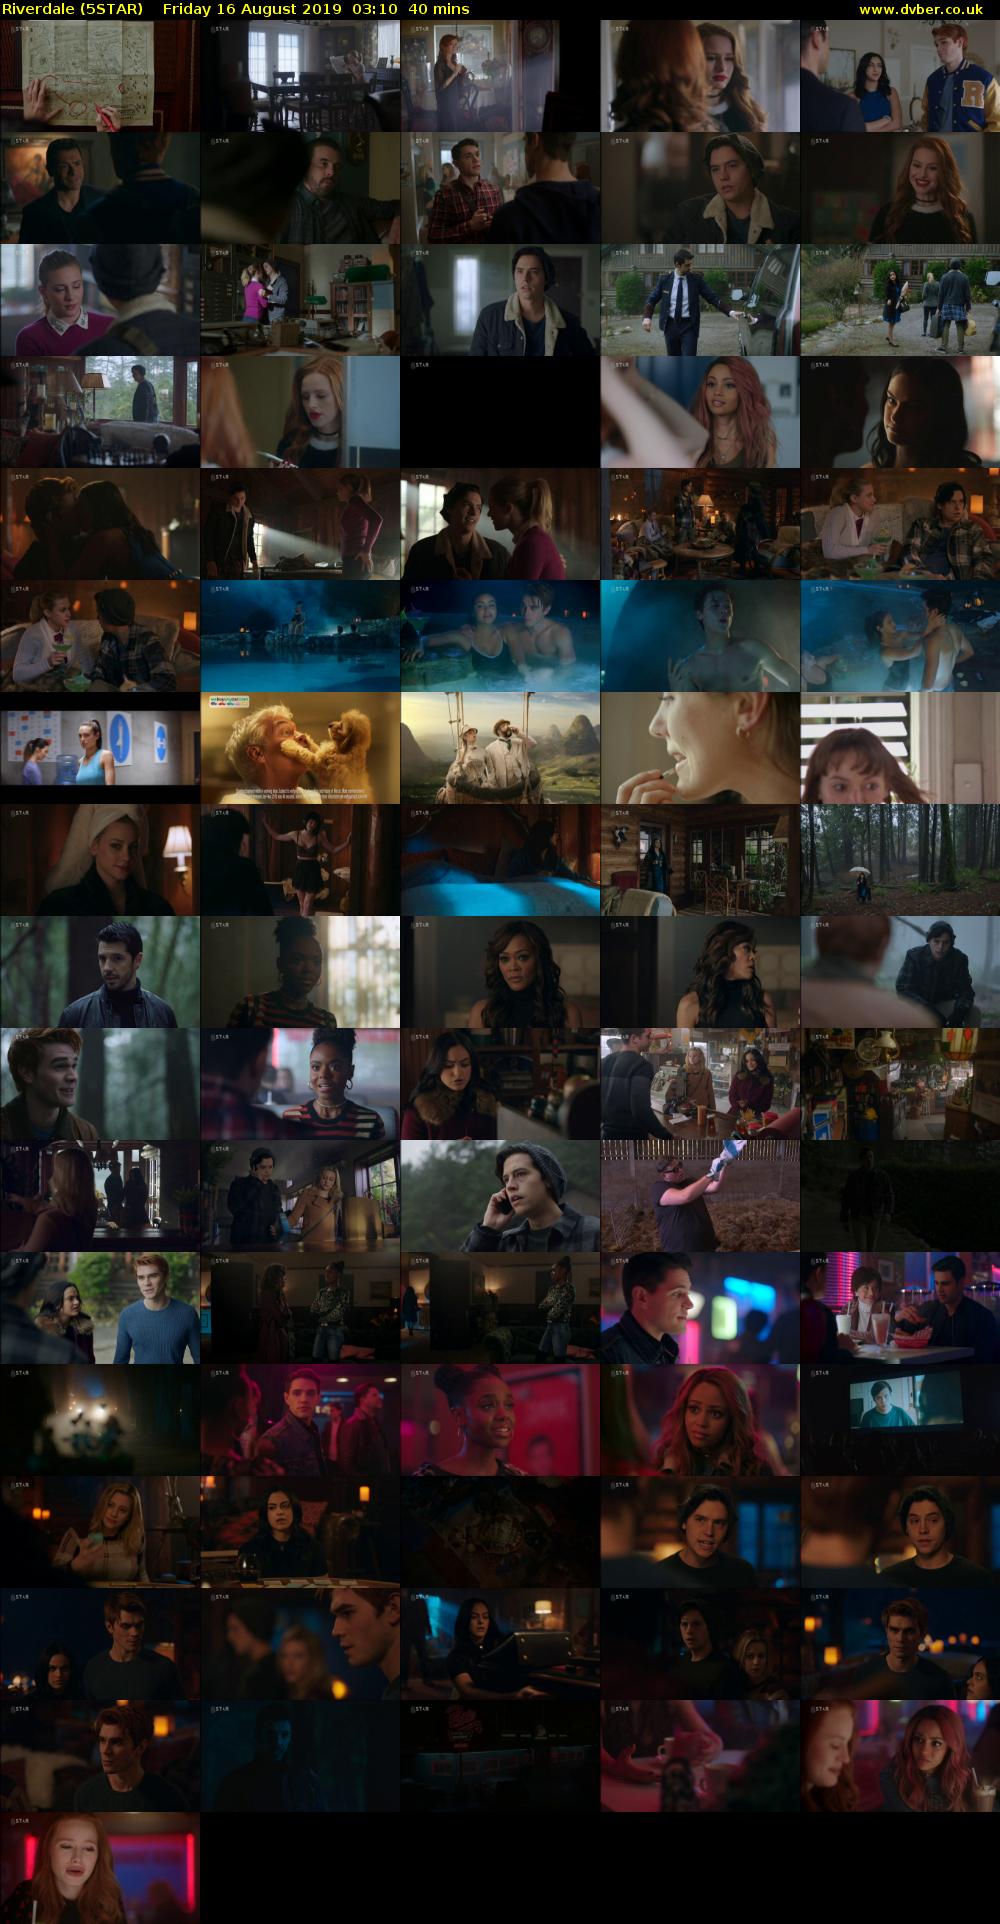 Riverdale (5STAR) Friday 16 August 2019 03:10 - 03:50